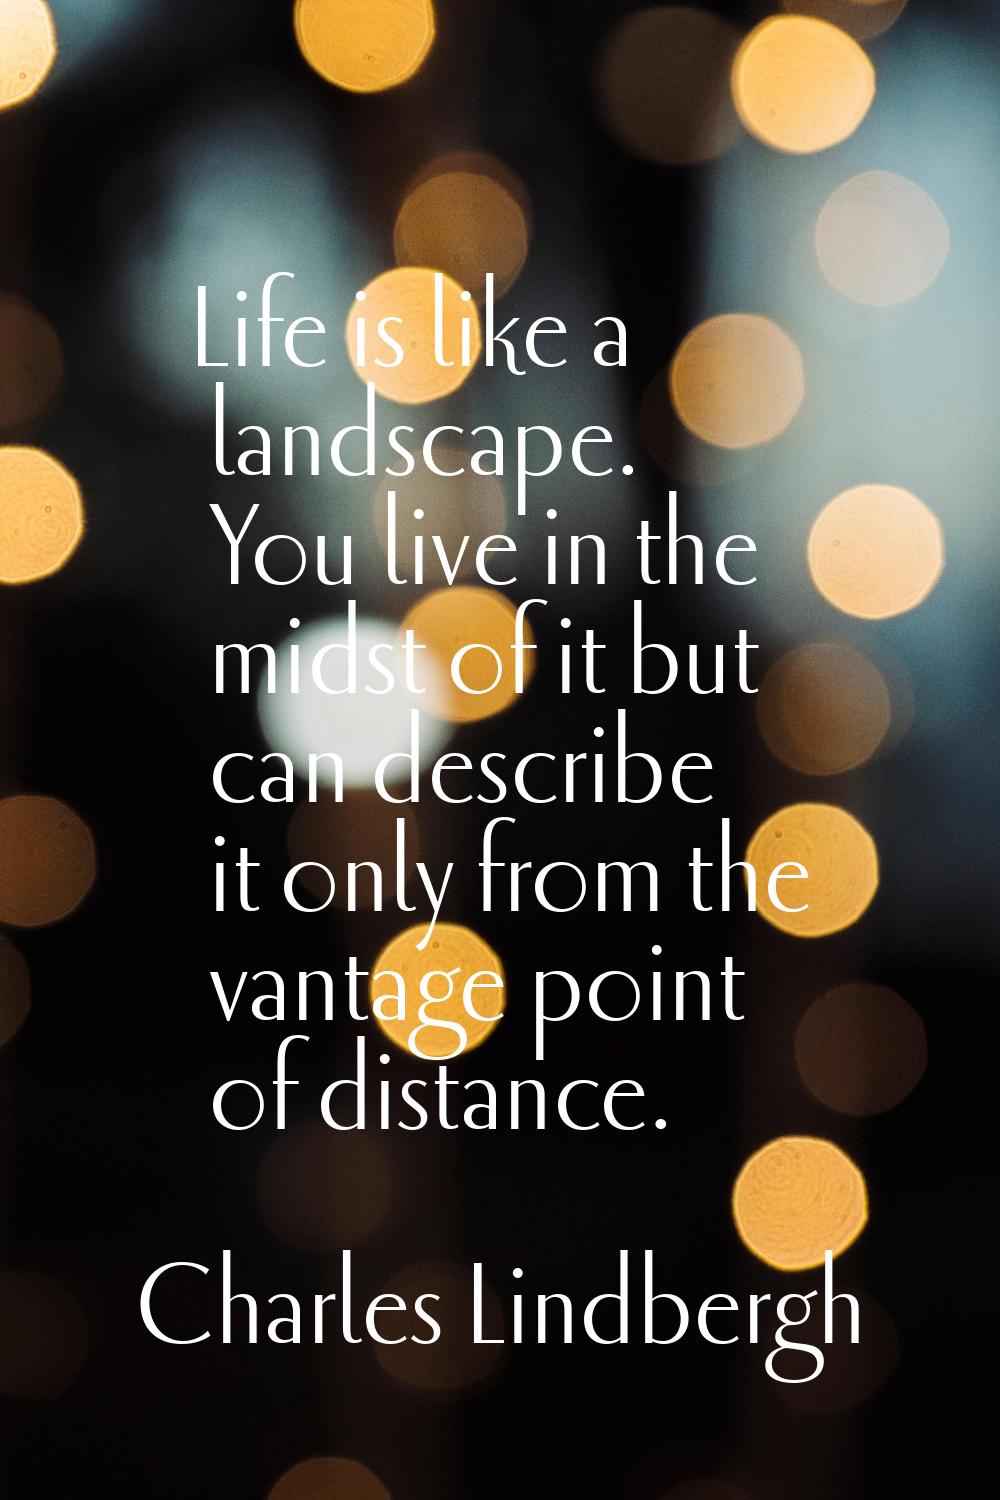 Life is like a landscape. You live in the midst of it but can describe it only from the vantage poi